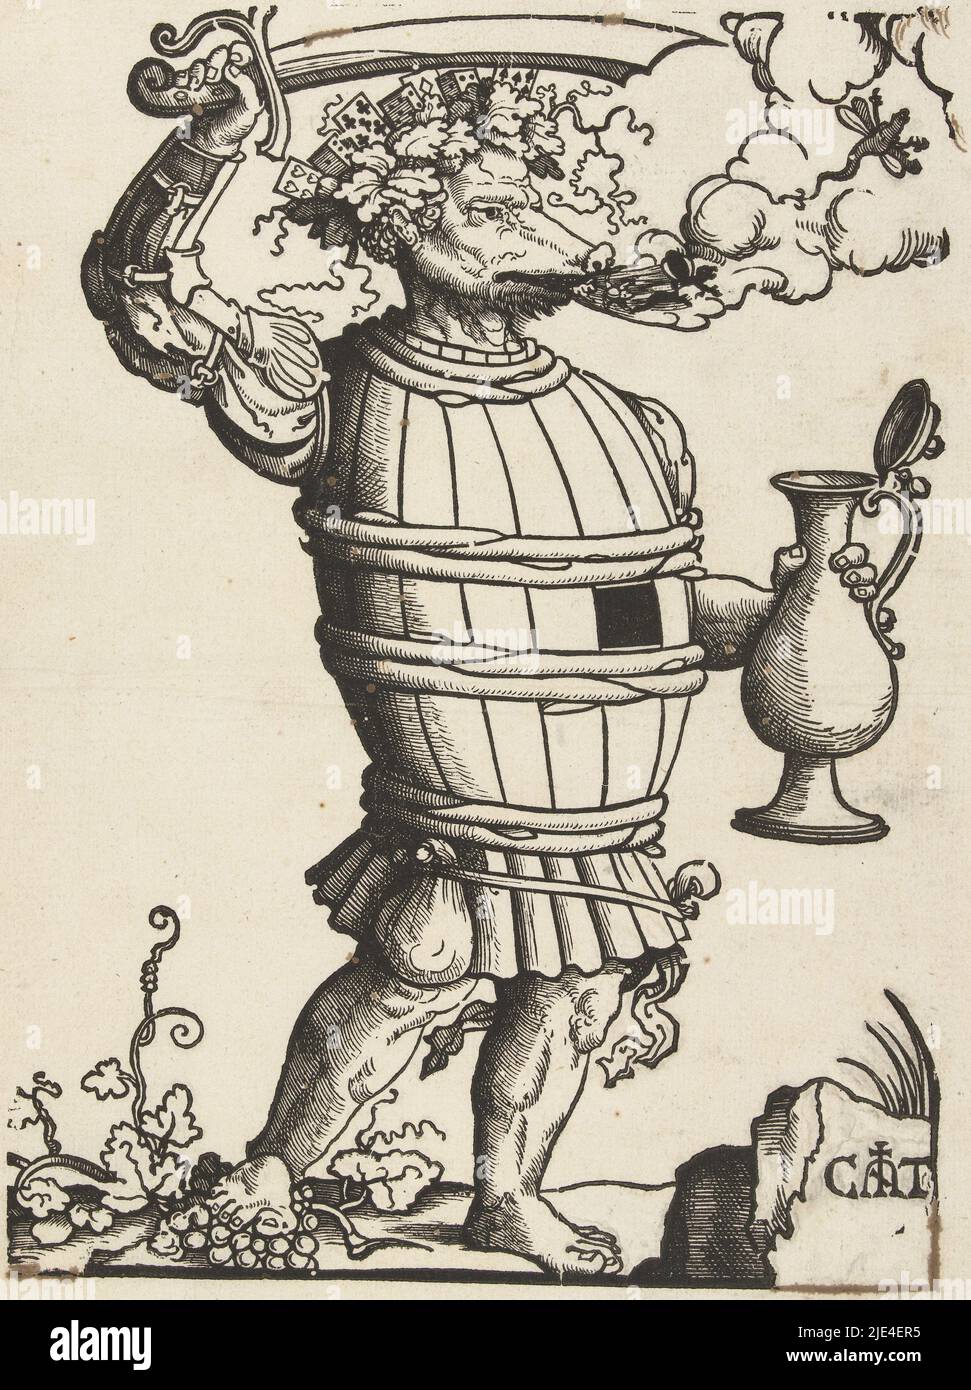 The Playing and Wine Devil, Cornelis Anthonisz., 1535 - 1553, Monster with wine barrel around body and playing cards on head. In right hand sword, in left hand drinking cup. From its mouth come insects and smoke., print maker: Cornelis Anthonisz., (mentioned on object), Low Countries, 1507 - 1553, paper, pen, h 317 mm × w 219 mm Stock Photo